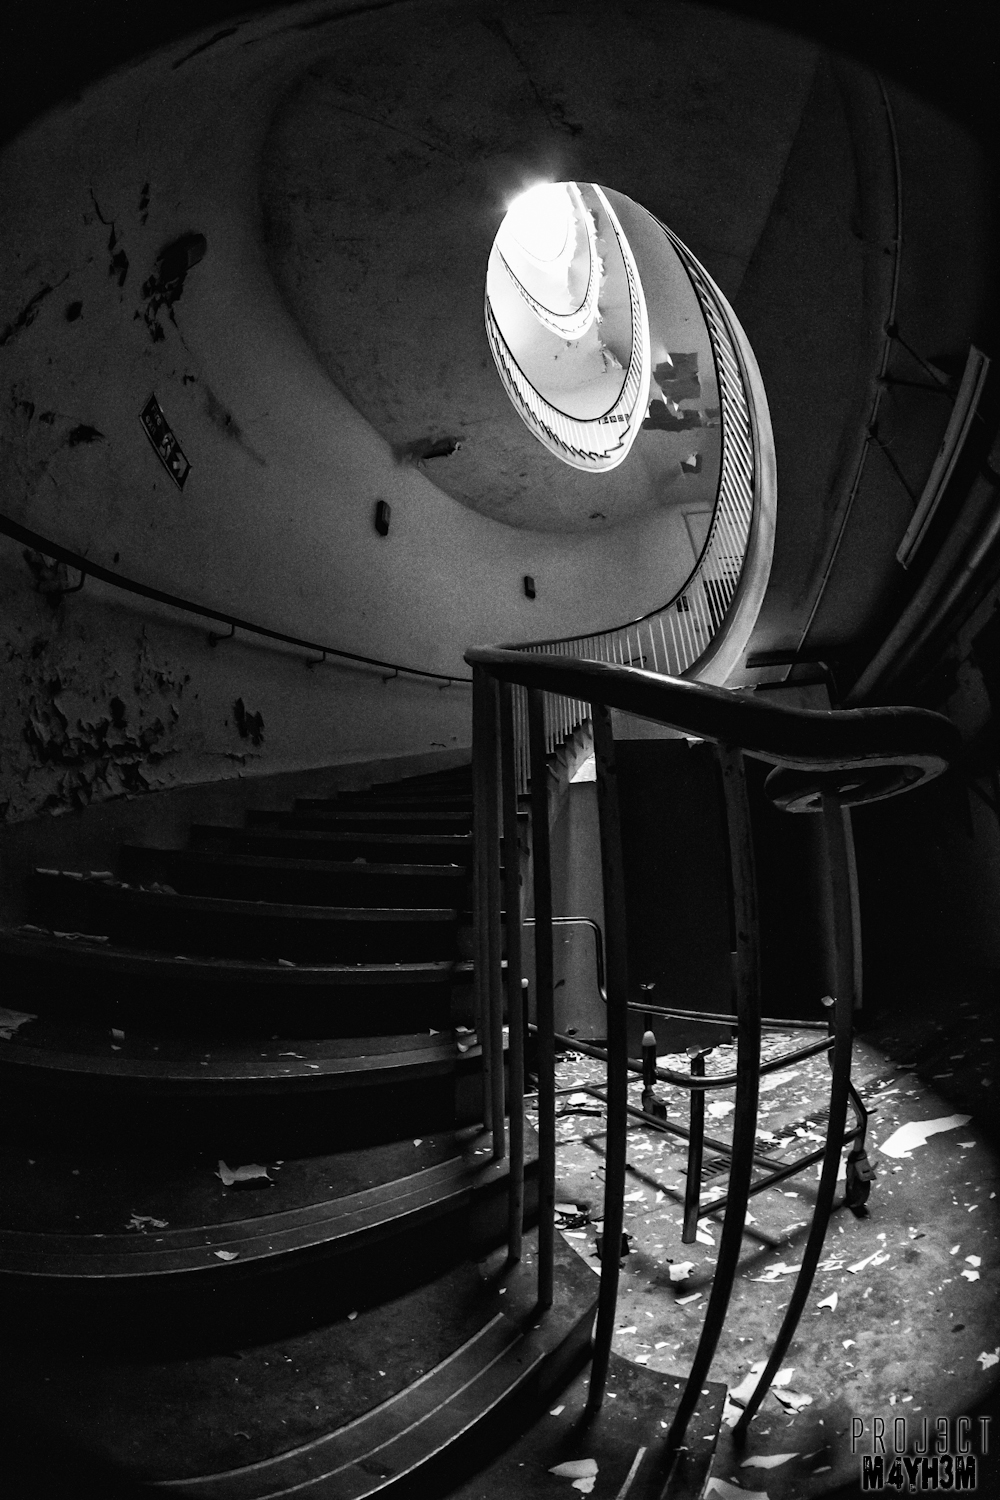 Serenity Hospital - The Spiral Staircase